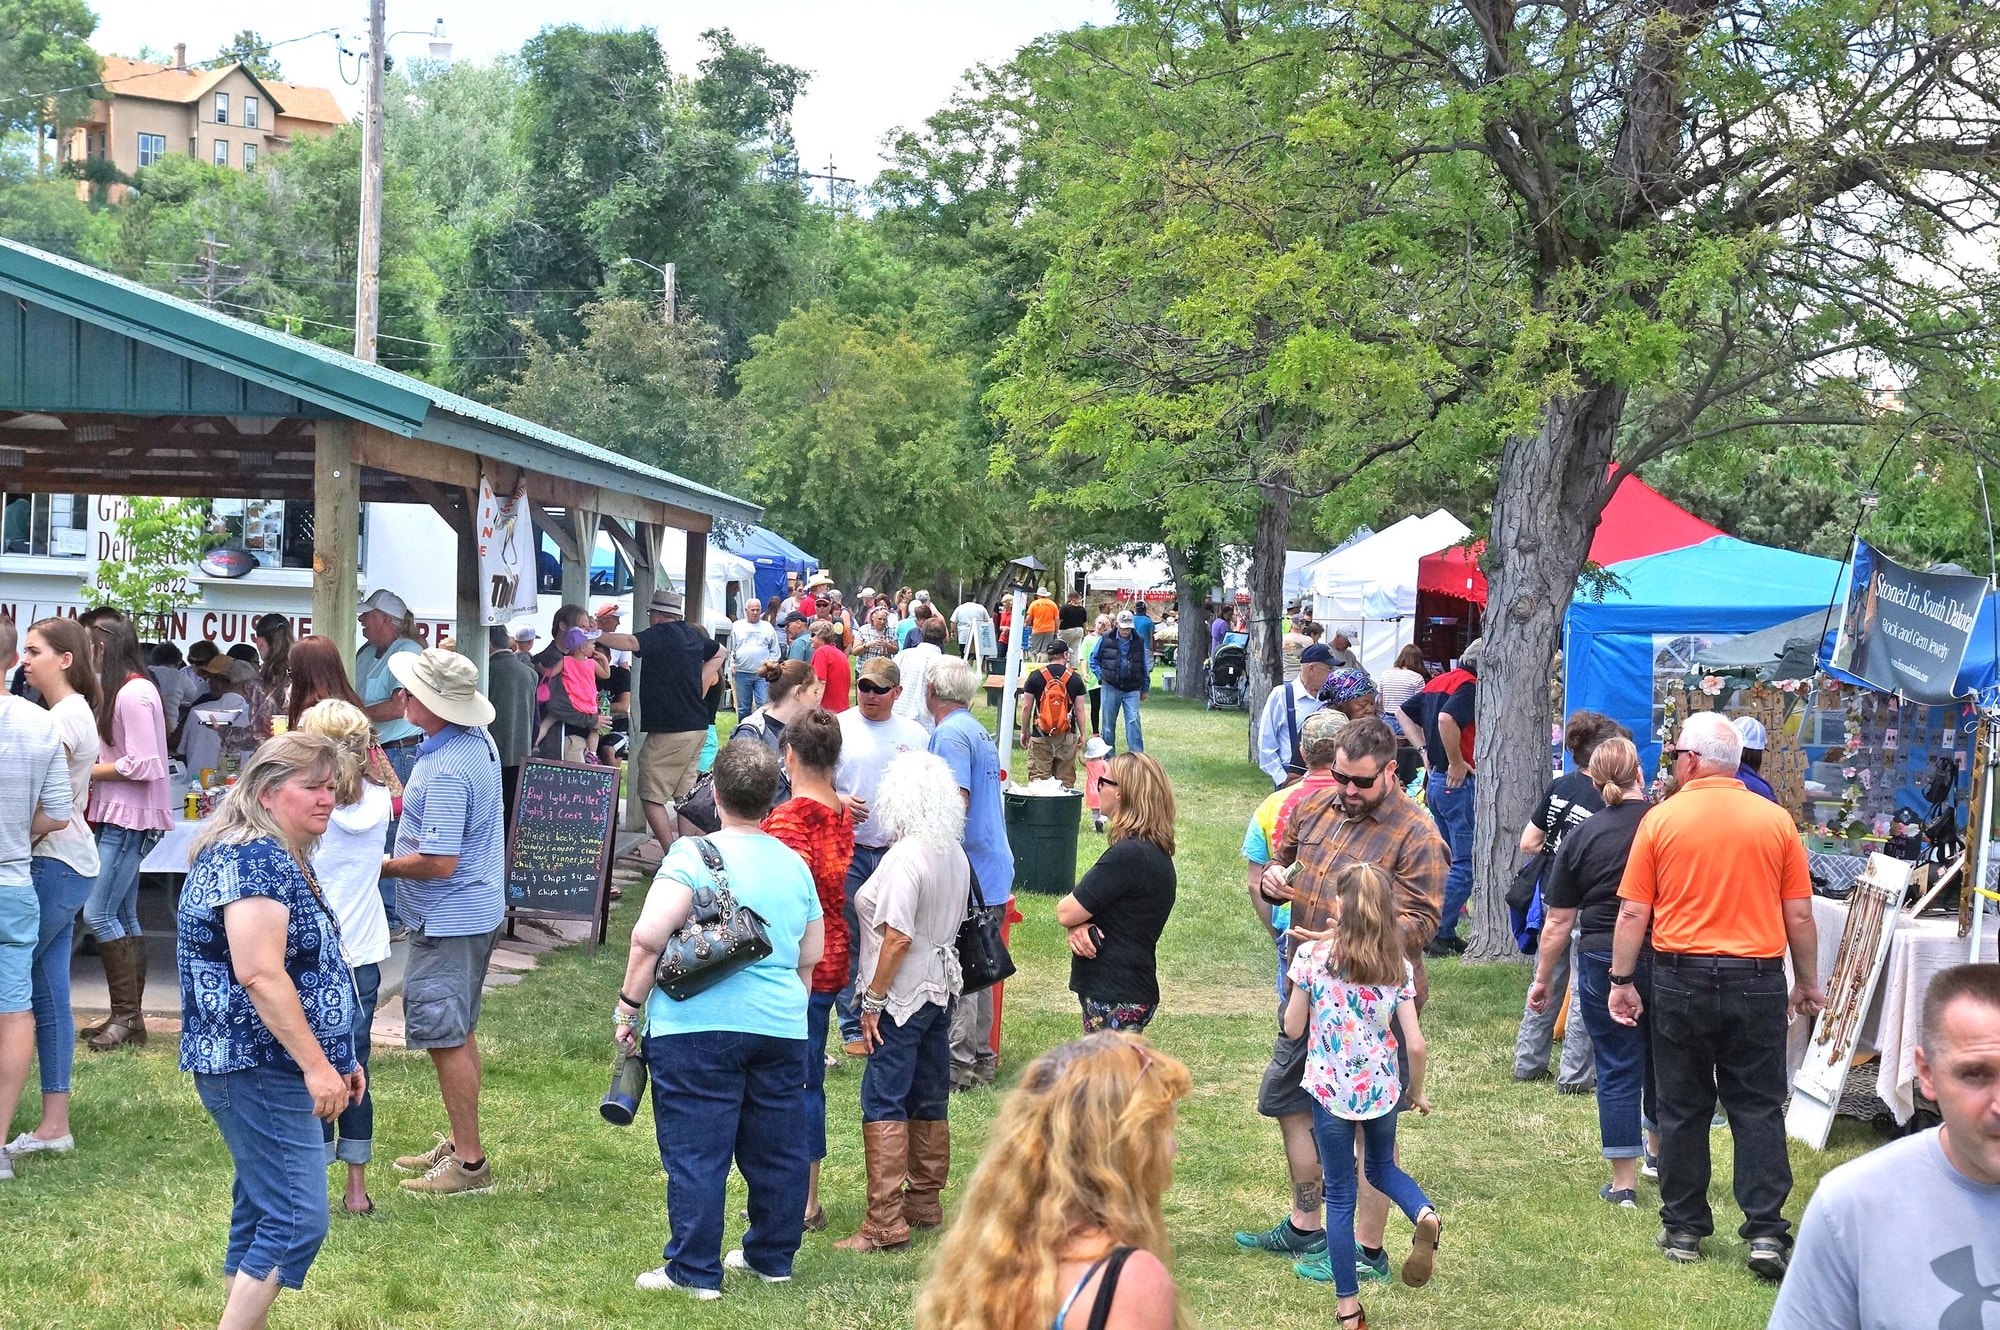 46th Annual Main Street Arts and Crafts Festival